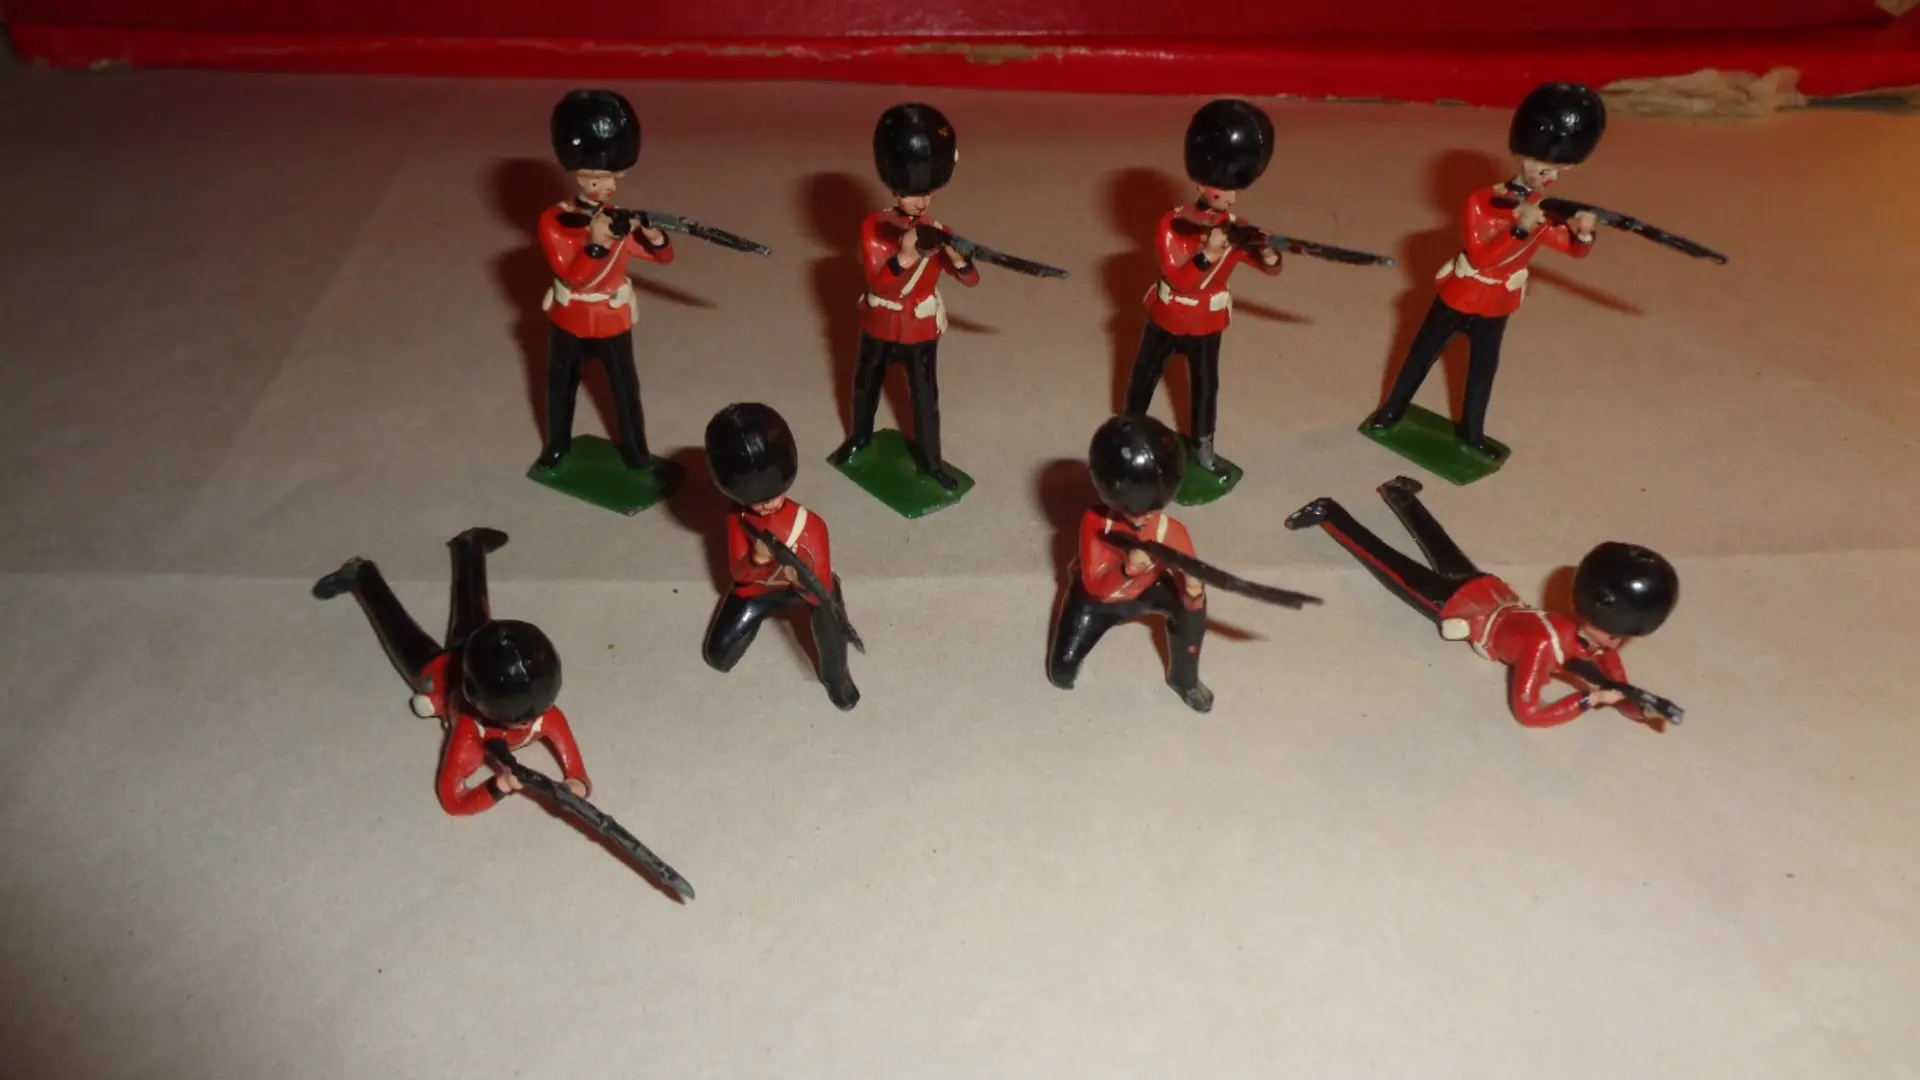 Toy soldiers in action